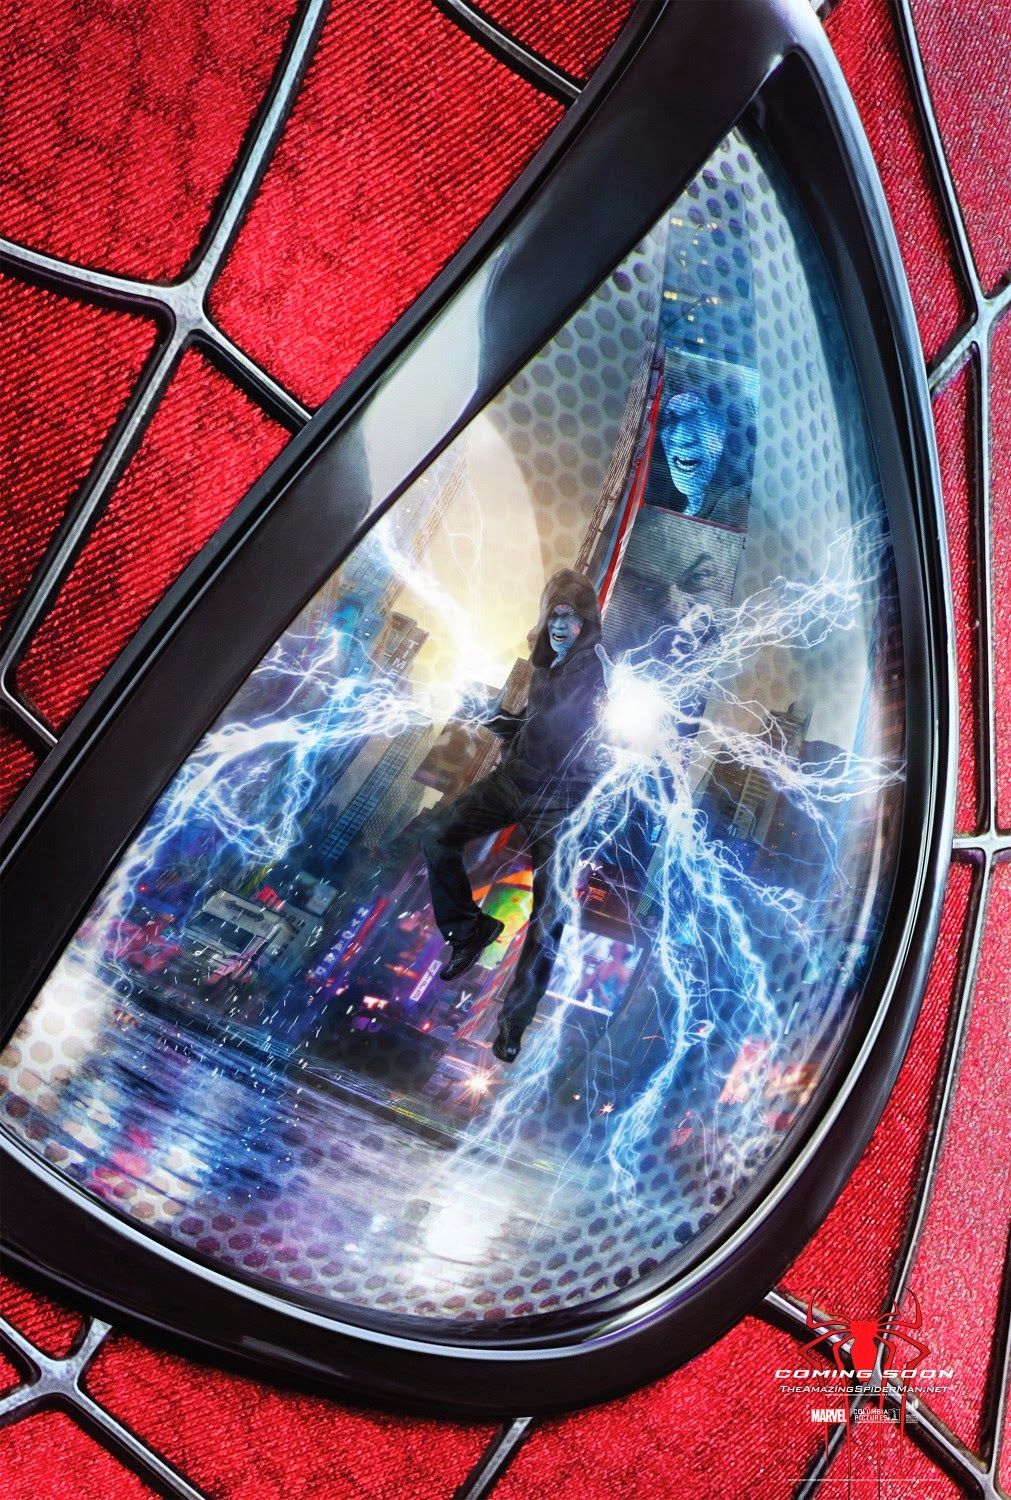 The Blot Says.: The Amazing Spider Man 2 “Spider Man Vs Electro” Movie Posters